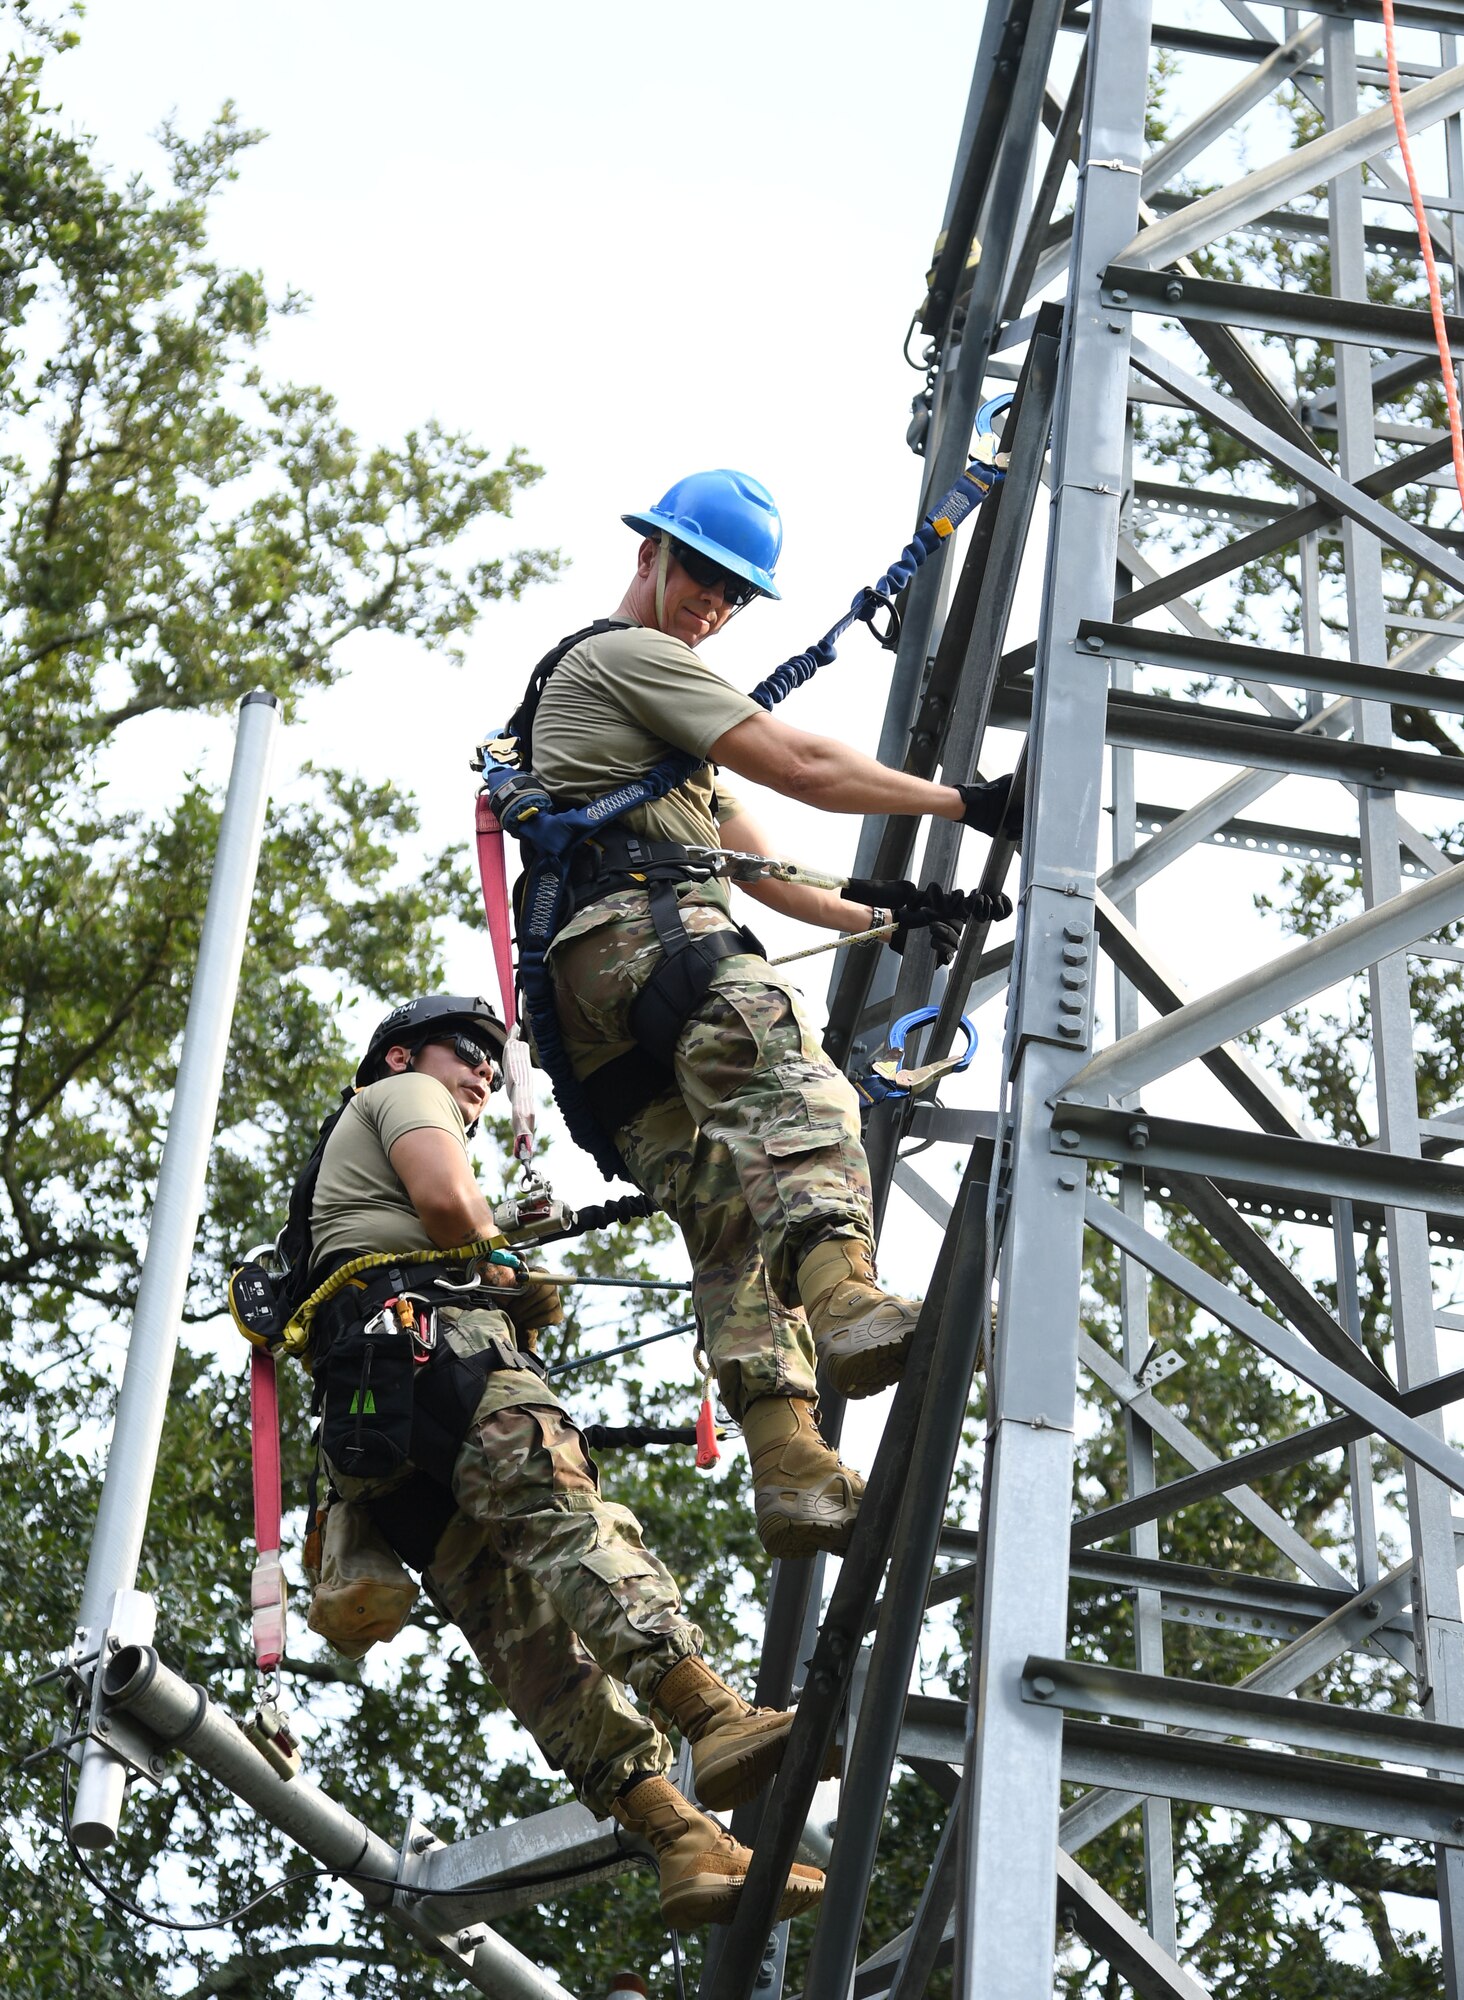 U.S. Air Force Col. William Hunter, 81st Training Wing commander, participates in a tower climbing demonstration with the assistance of Staff Sgt. Austin Johnson, 85th Engineering Installation Squadron cable and antenna systems technician, during an 85th EIS immersion tour behind Maltby Hall at Keesler Air Force Base, Mississippi, Sept. 1, 2021. The purpose of the tour was to become more familiar with the squadron's mission and its capabilities. (U.S. Air Force photo by Kemberly Groue)